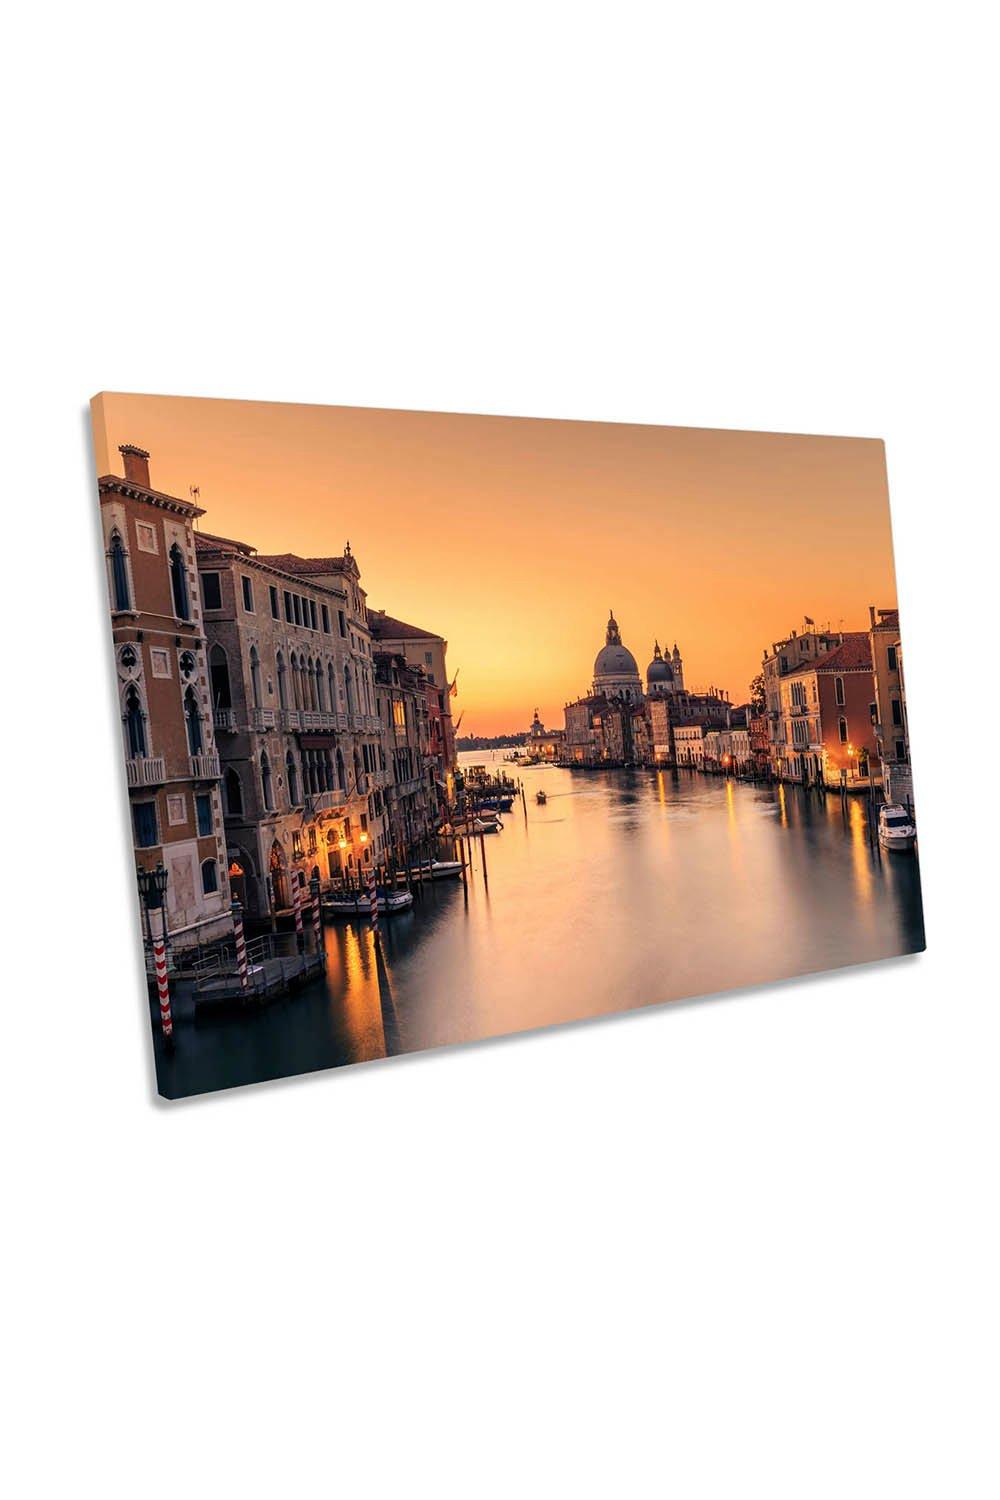 Dawn On Venice Italy Canals Orange Canvas Wall Art Picture Print